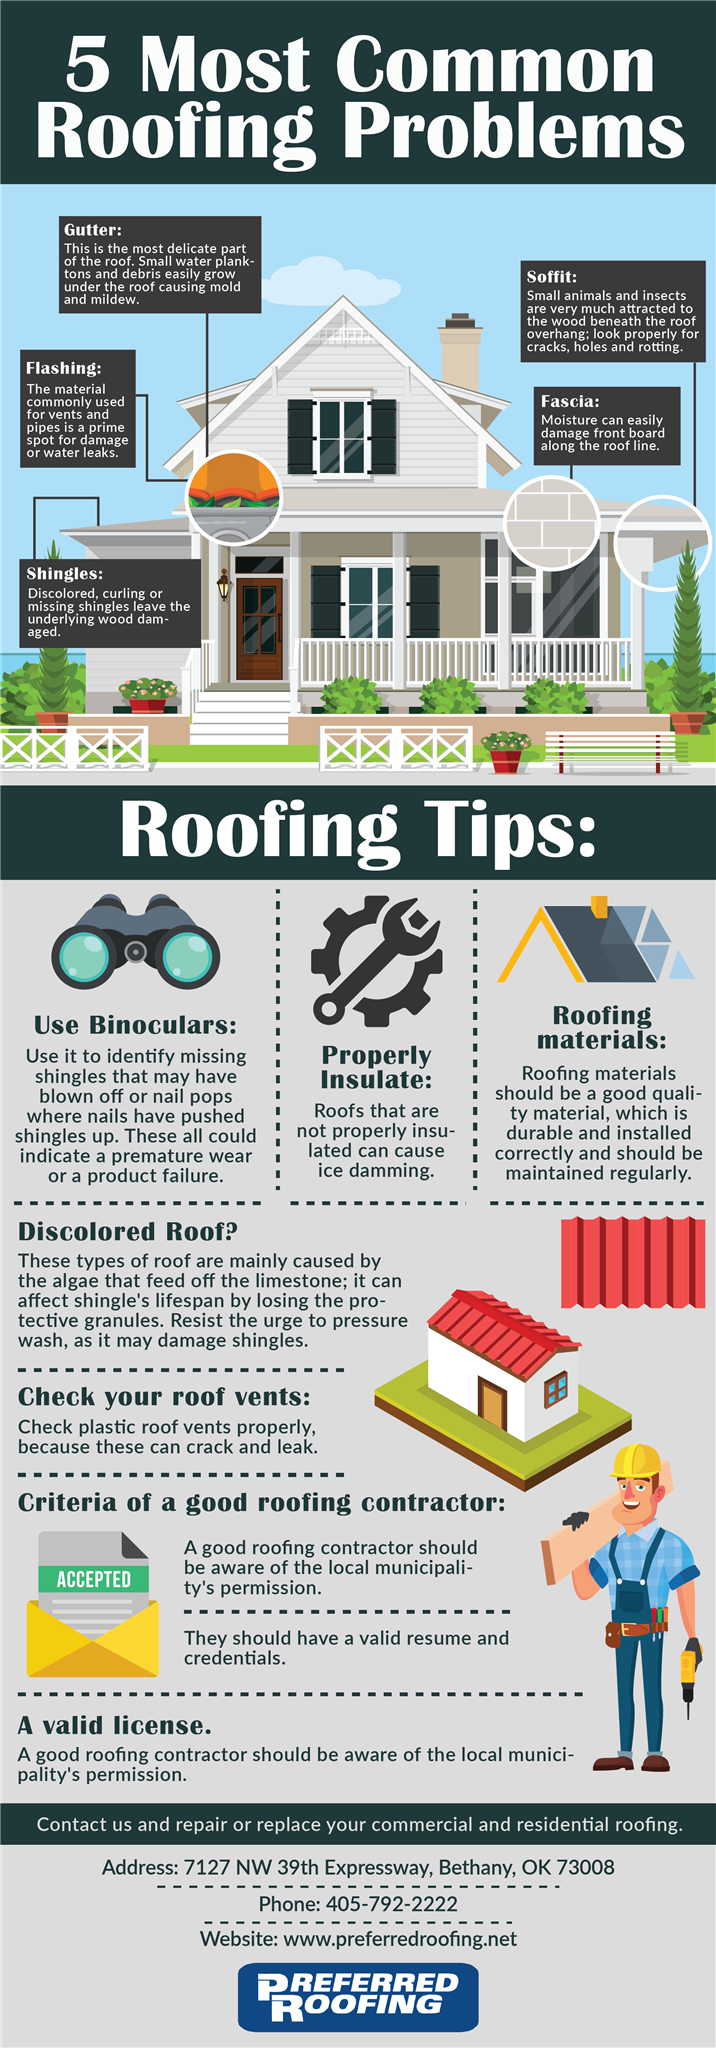 What Are The Most Common Roof Problems?